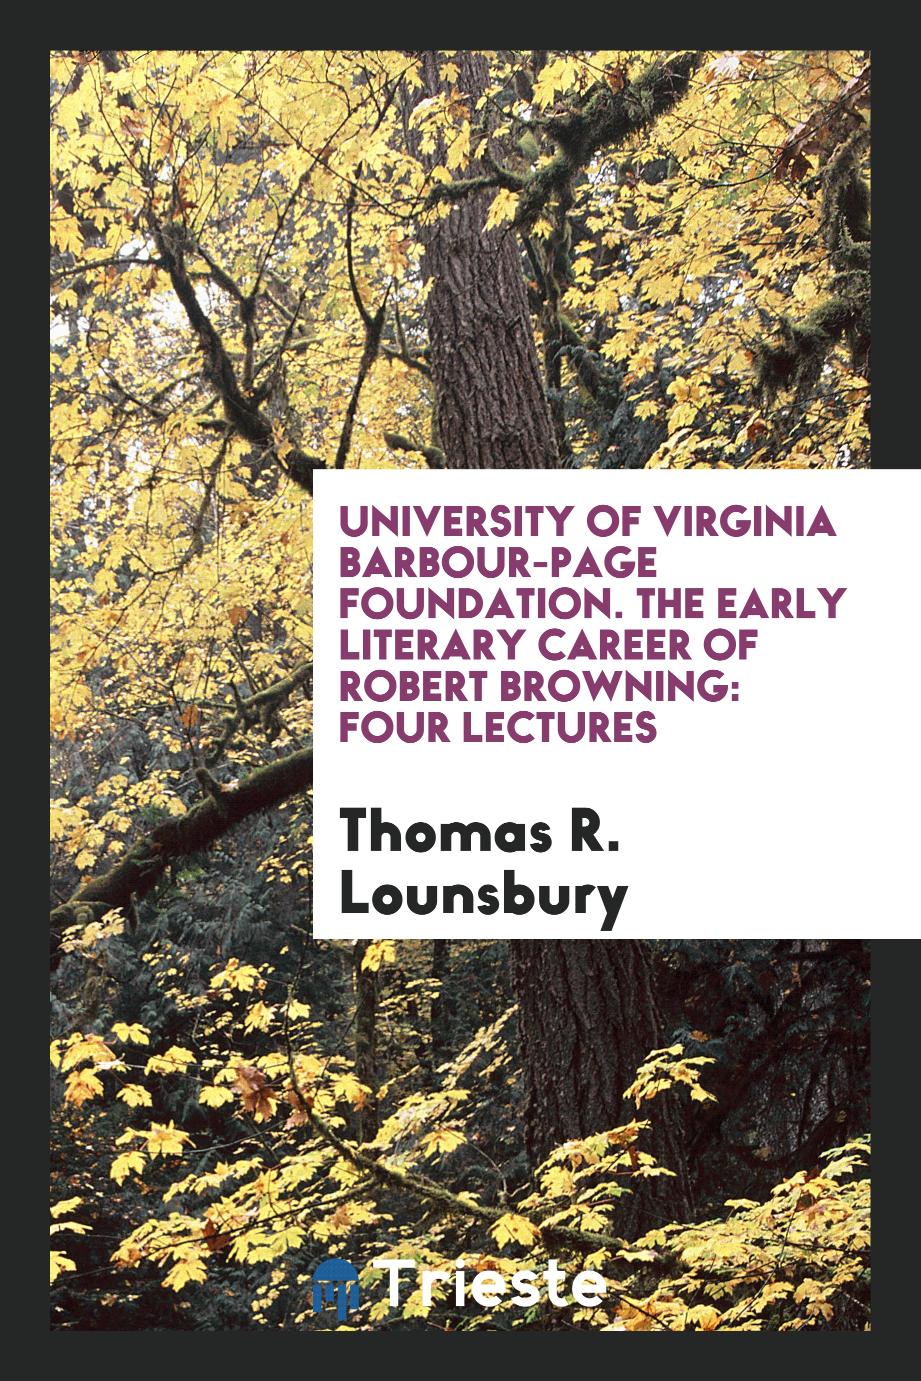 University of Virginia Barbour-Page Foundation. The Early Literary Career of Robert Browning: Four Lectures